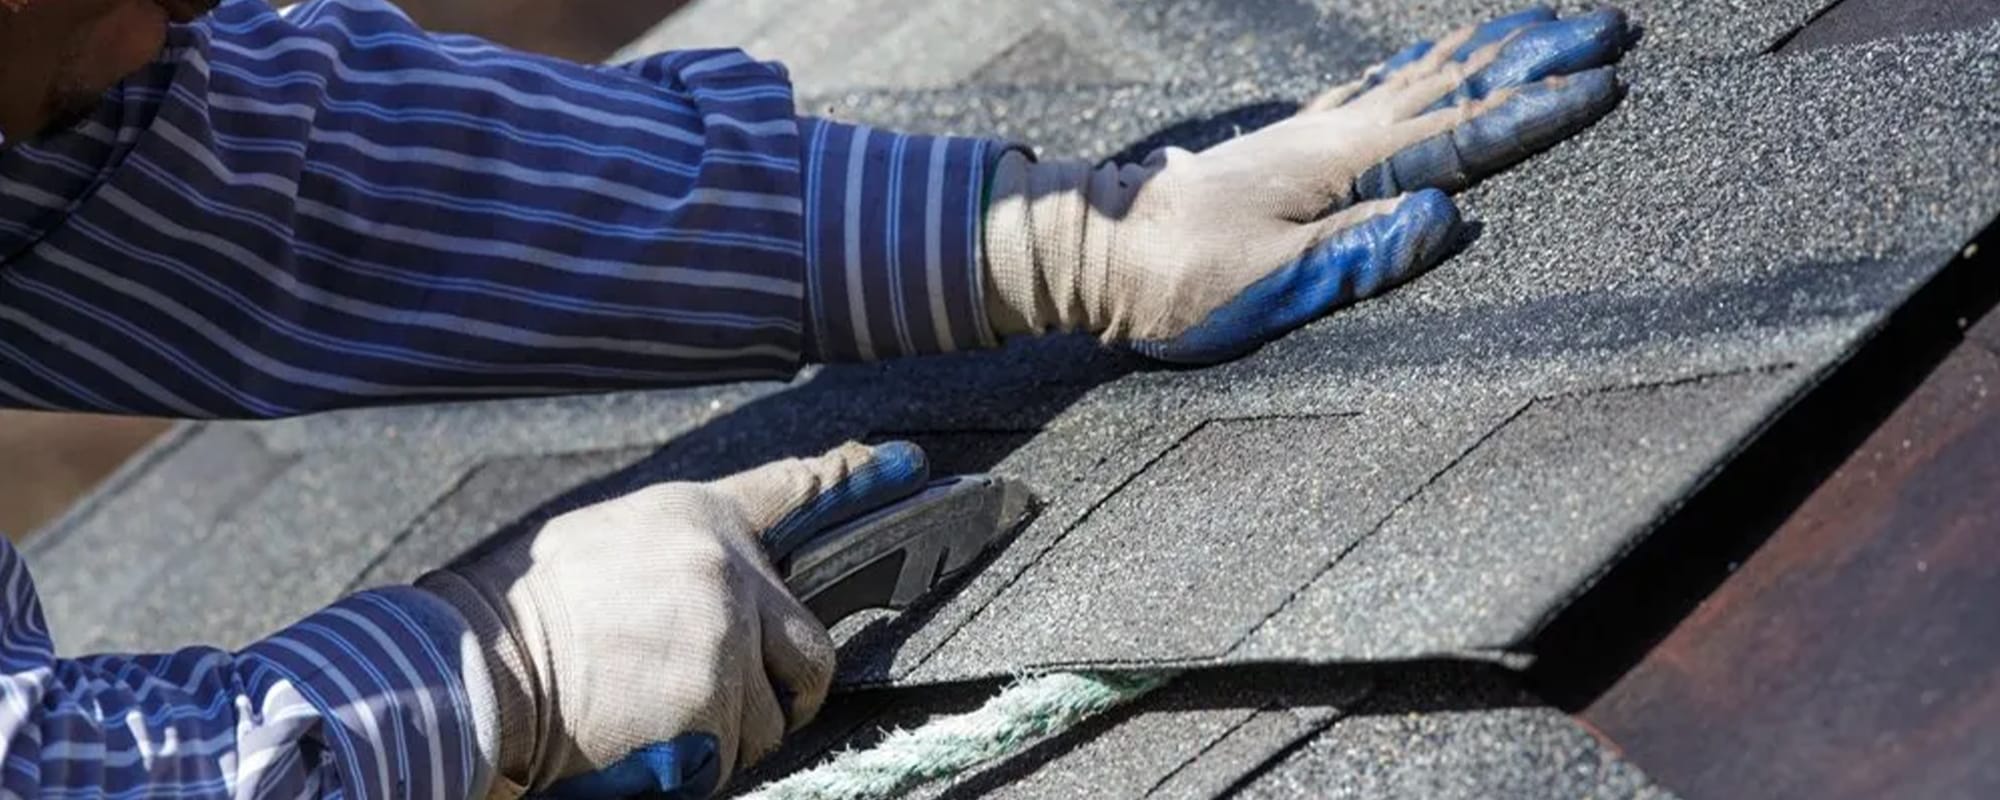 Major Things to Consider When Buying a New Roof